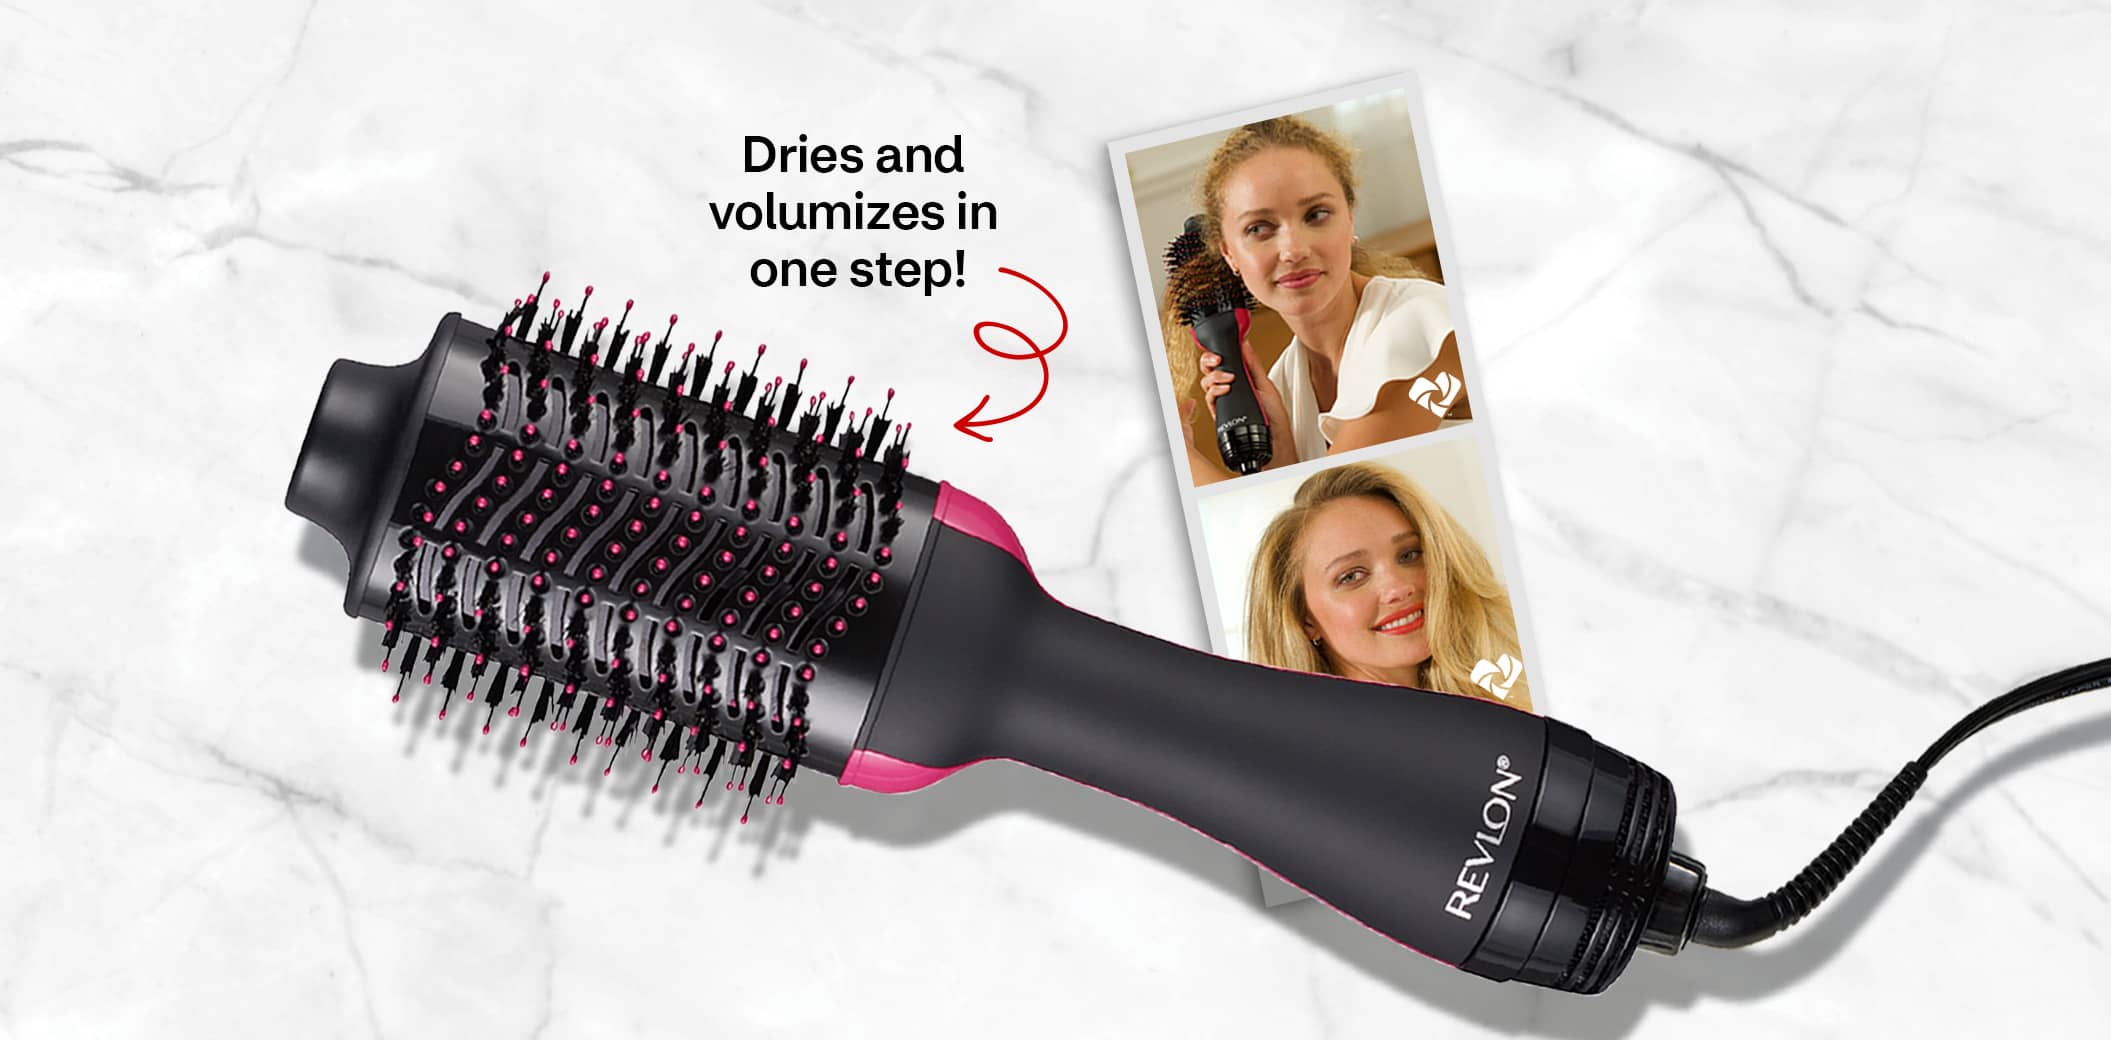 Revlon One-Step hair dryer and volumizer, dries and volumizes in one step!